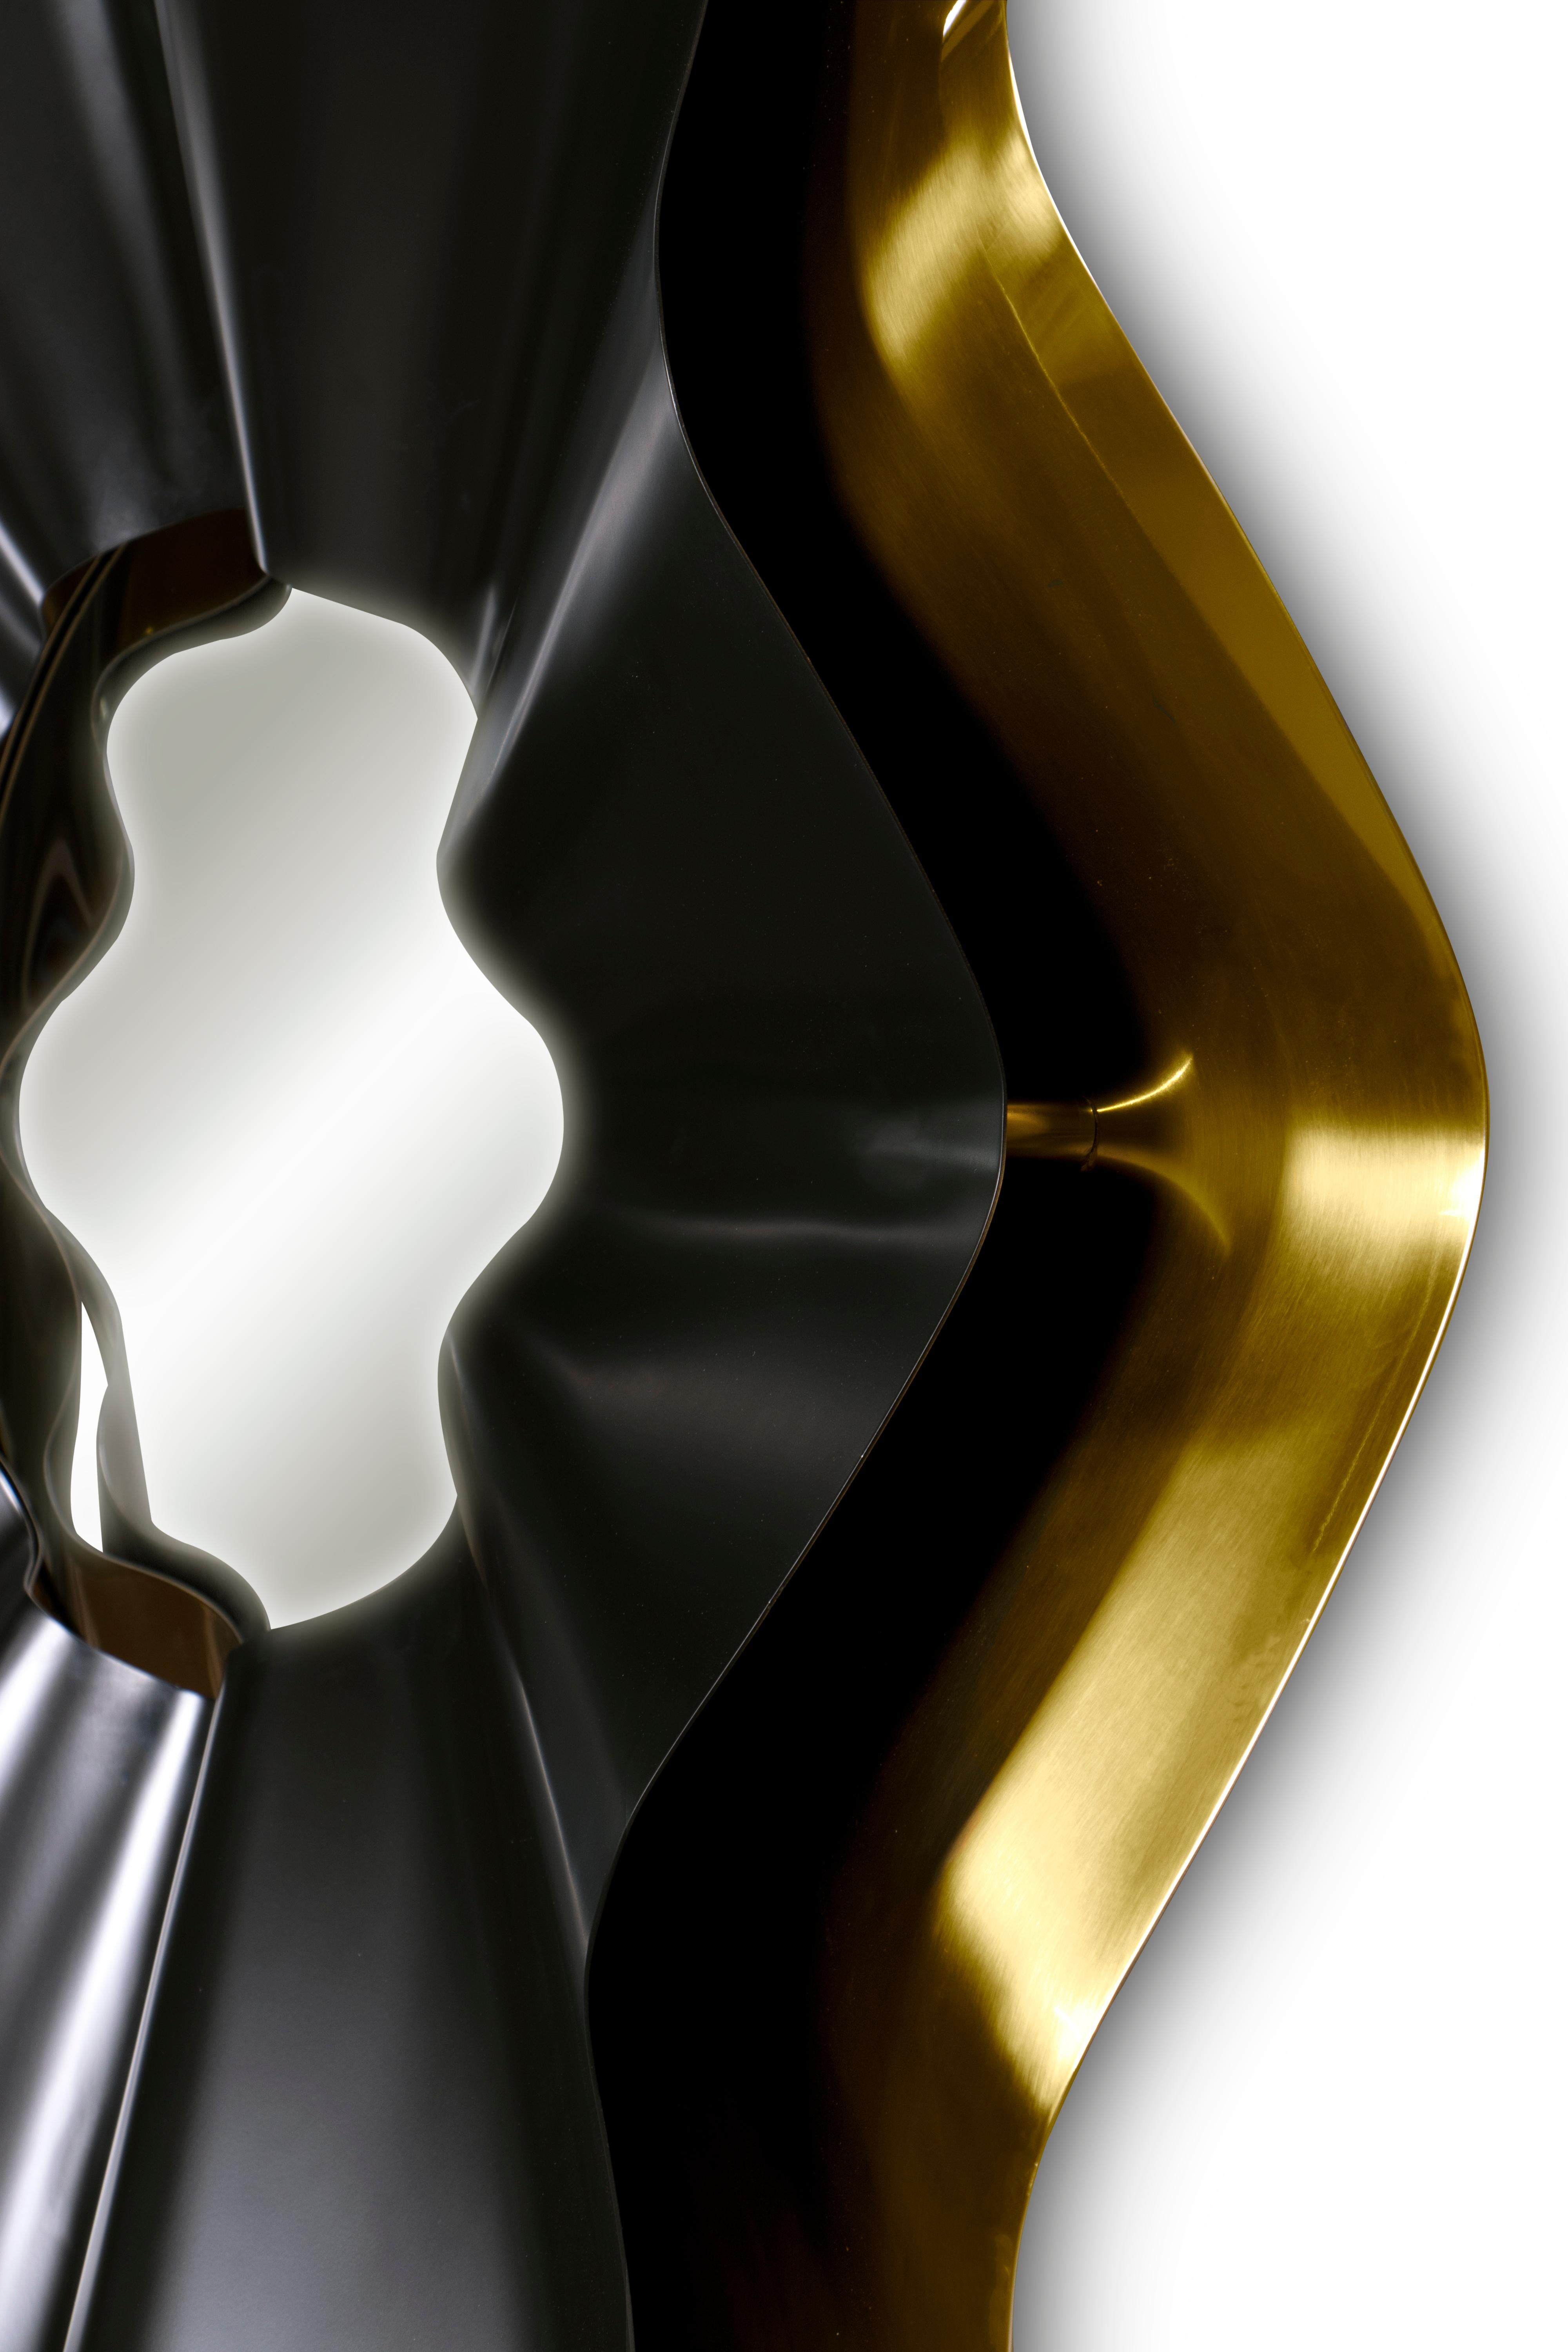 Poetry of design lies in the creation of illusions. Lust after the Reve mirror finished in a matte exterior with a high gloss metallic interior, unleashing the rules of reality and giving you the power of self-exploration.

Outer ring: Gold chromium